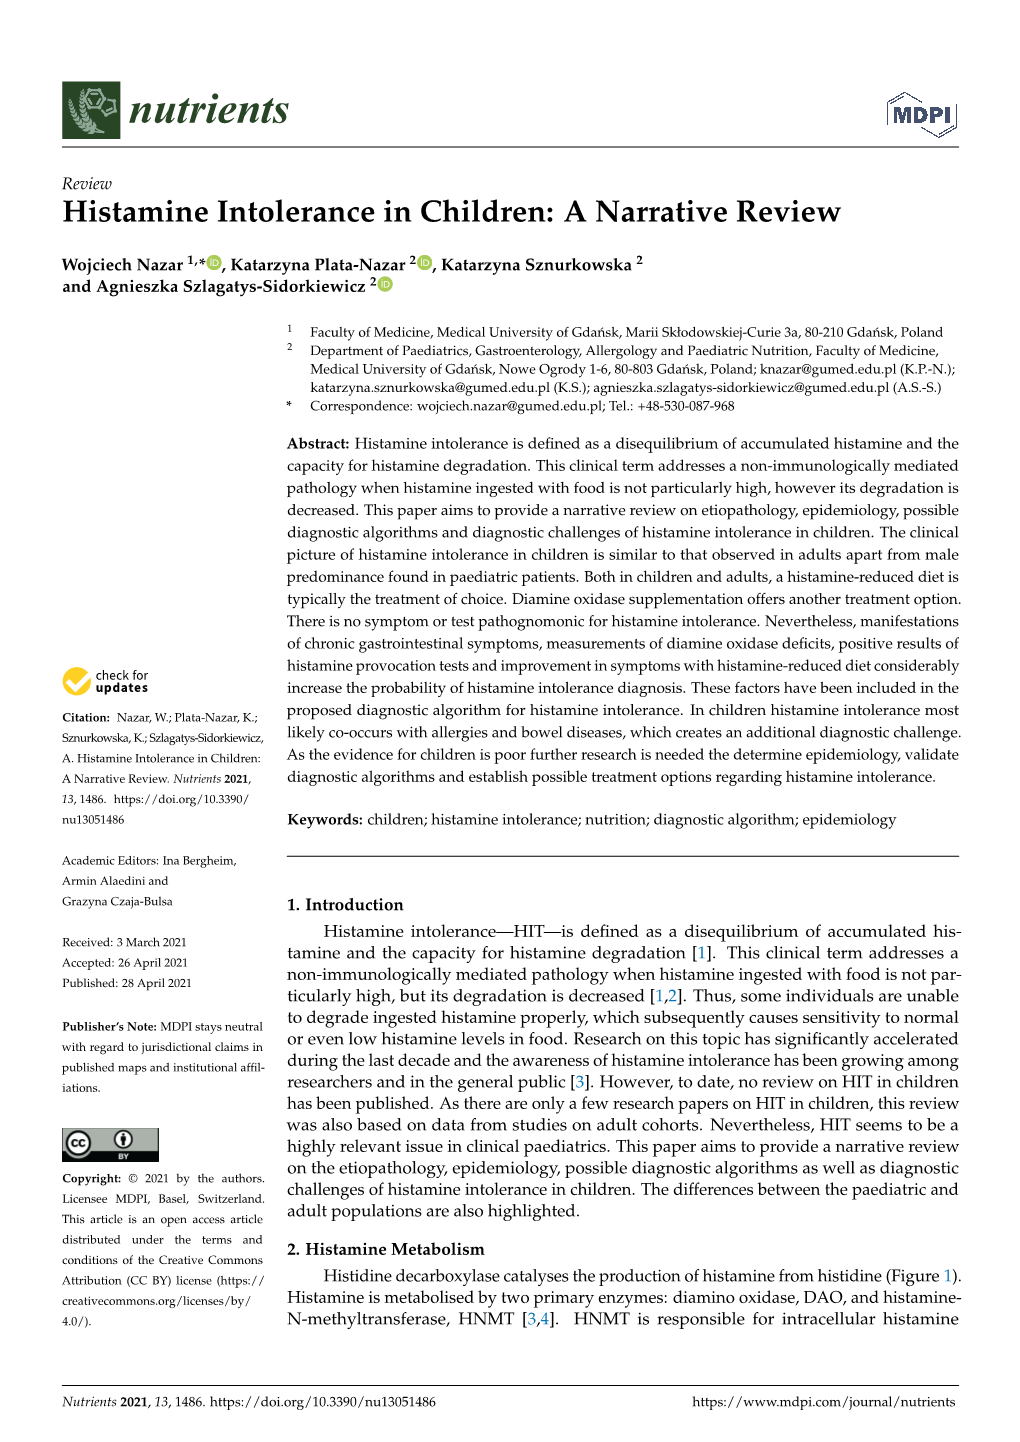 Histamine Intolerance in Children: a Narrative Review